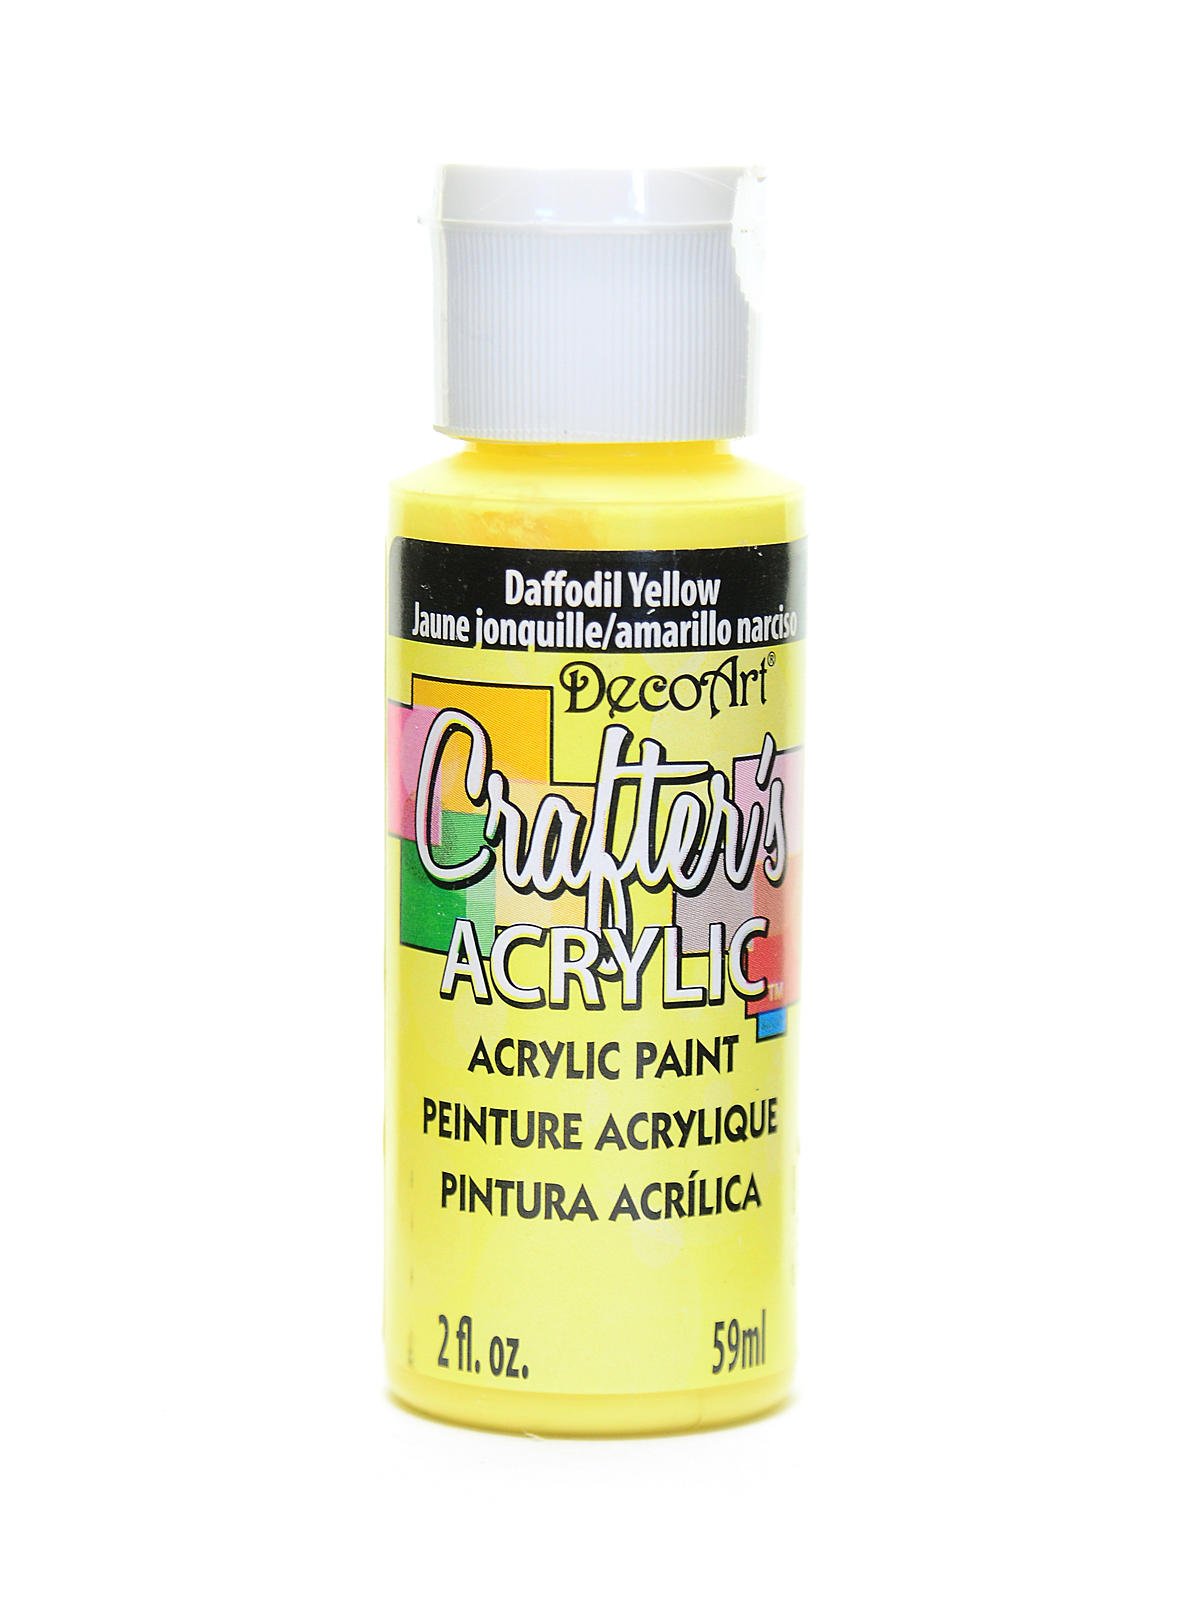 Crafter's Acrylic Multi Surface - DecoArt Acrylic Paint and Art Supplies